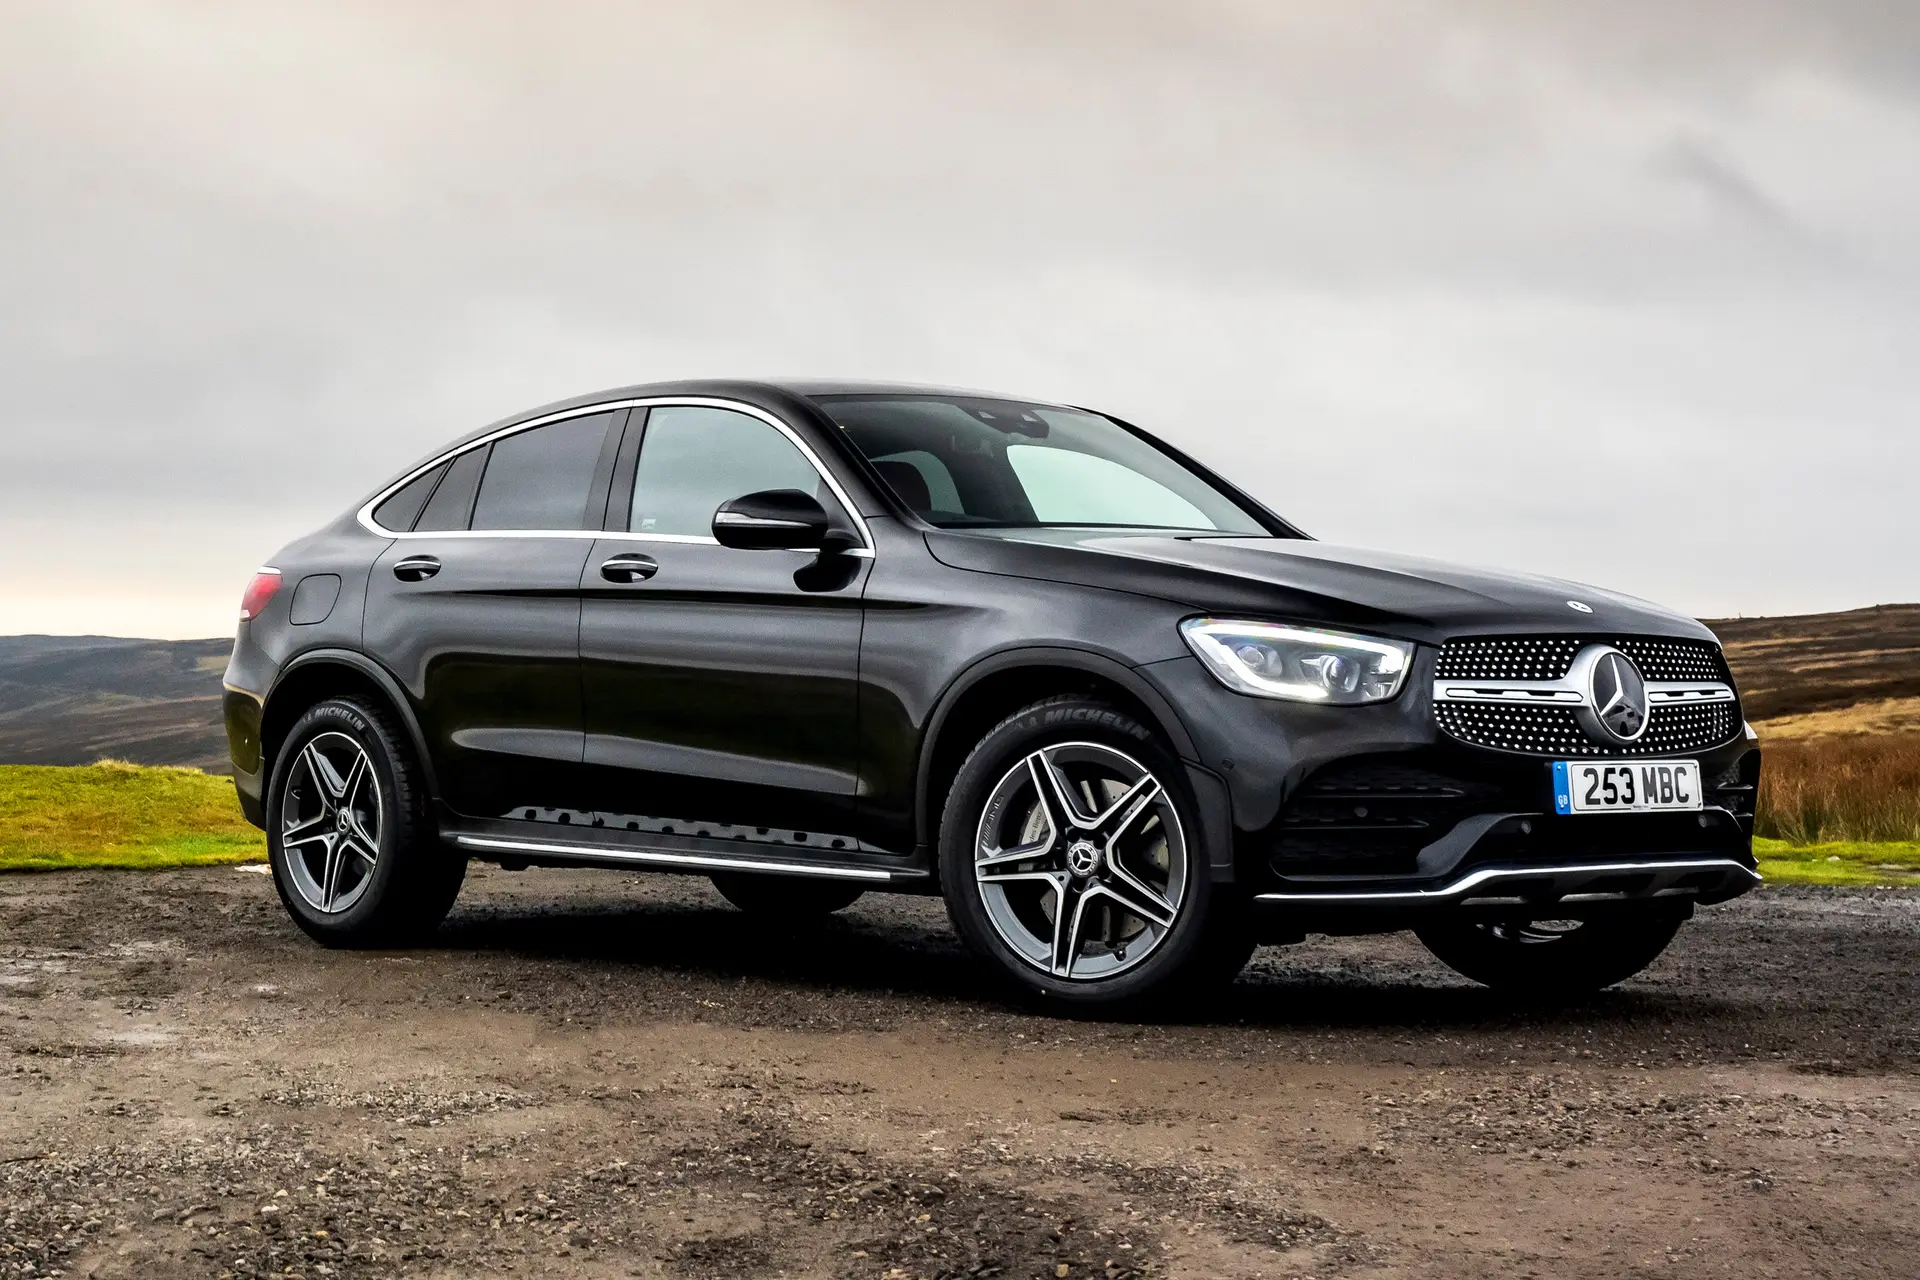 Mercedes-Benz GLC Coupe review, Car review